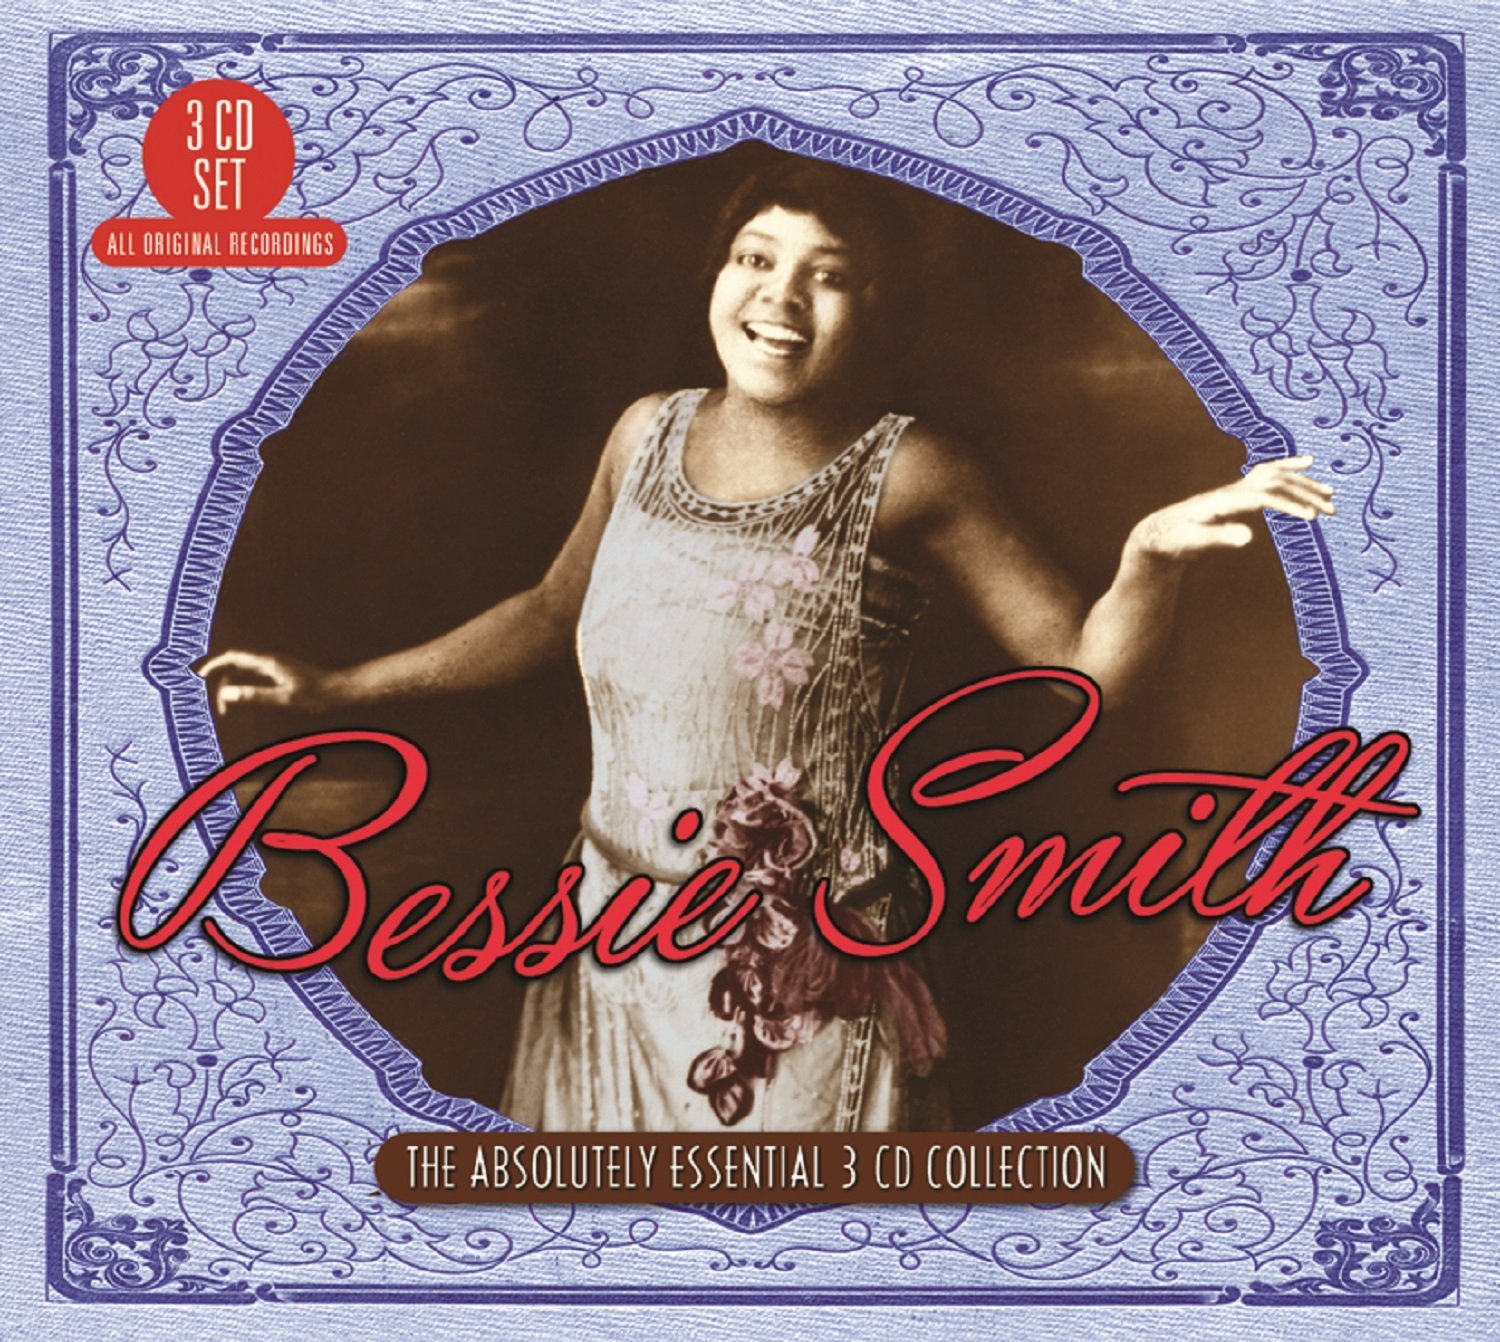 The Absolutely Essential Collection | Bessie Smith